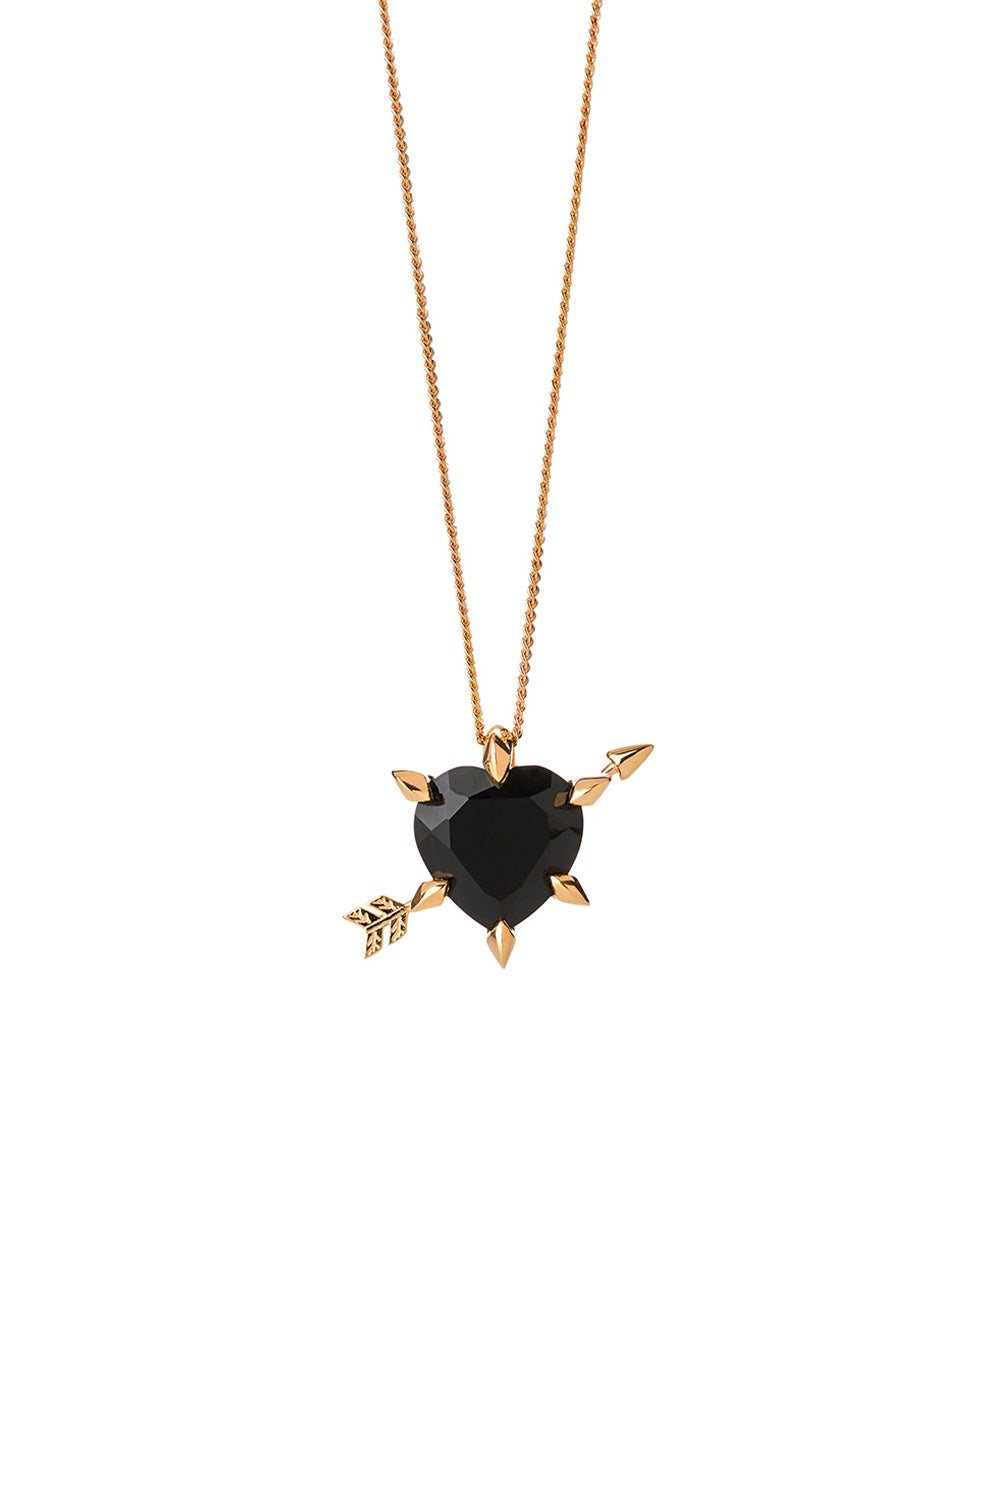 Cupid's Arrow and Heart Necklace Gold Onyx